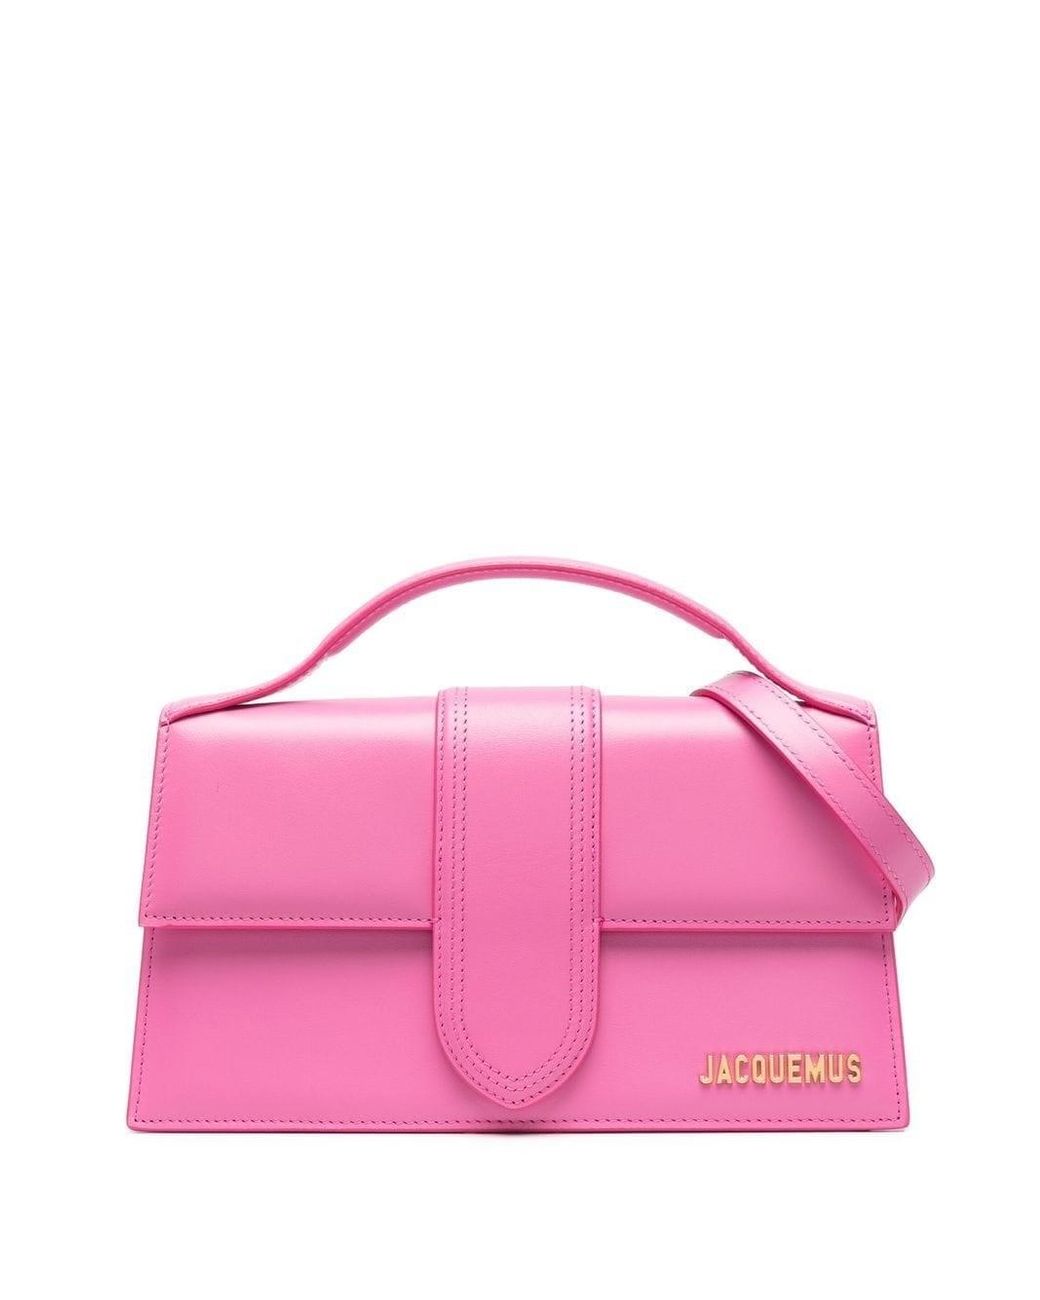 Jacquemus 'le Grand Bambino' Bag in Pink | Lyst Canada